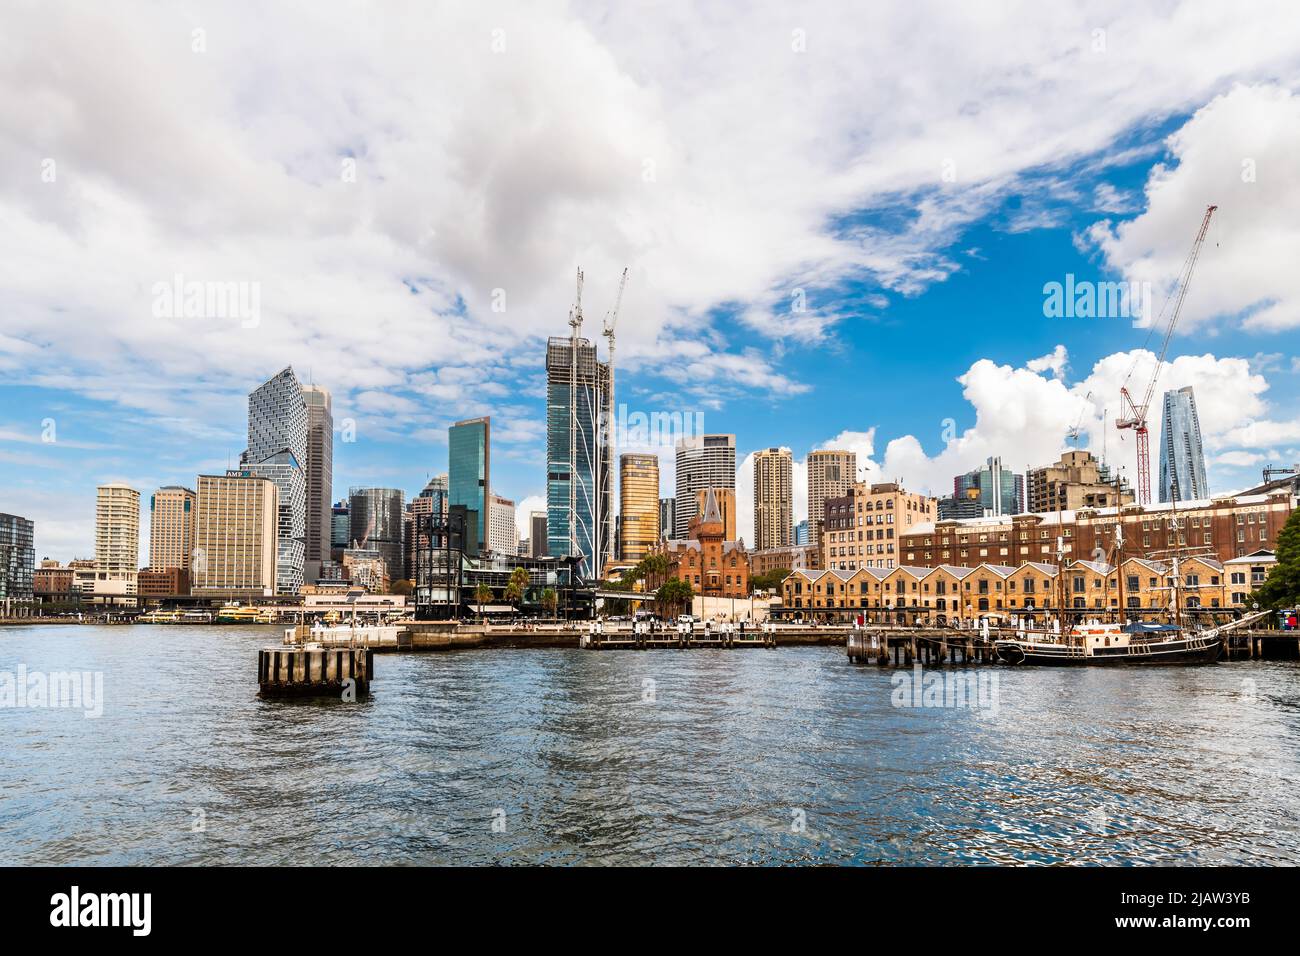 Sydney City, Australia - April 16, 2022: Sydney central business district and Circular Quay viewed through Campbells Cove from Hickson Road Reserve on Stock Photo